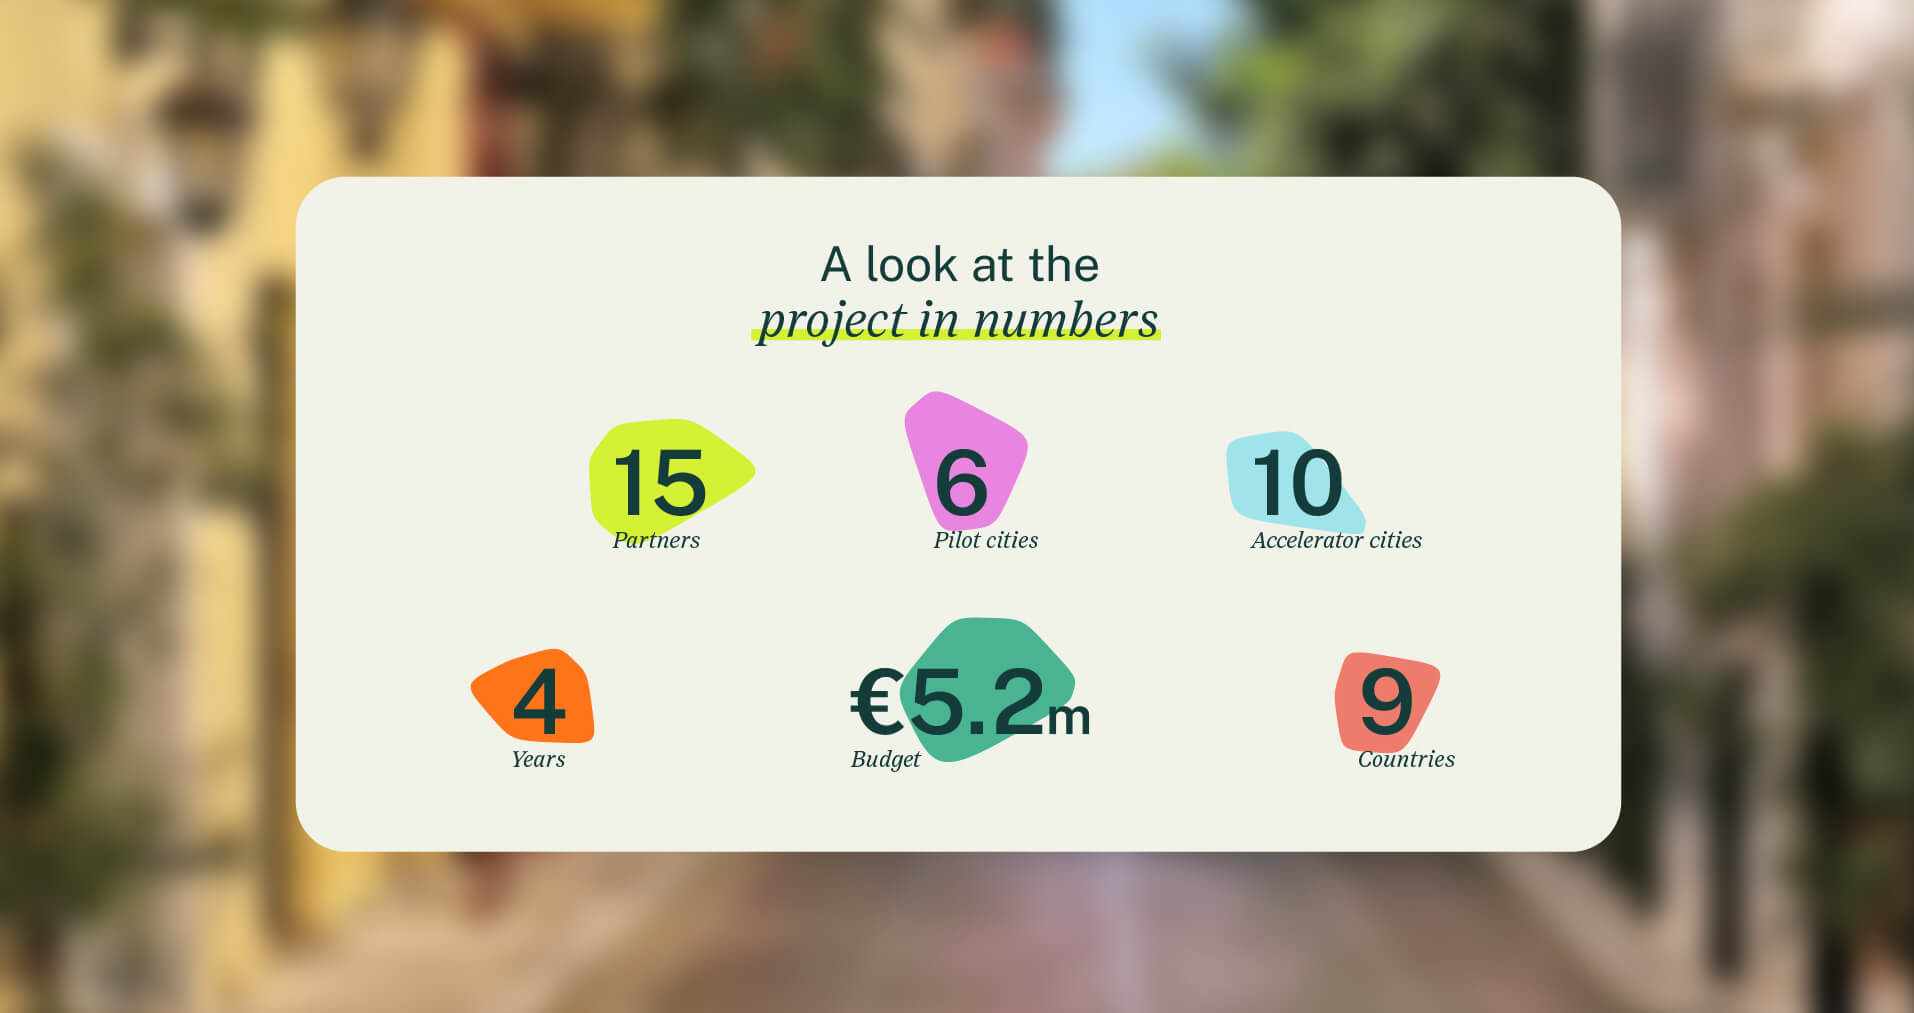 MSOMe key statistics from the project outlining the budget, number of partners, participating cities etc.